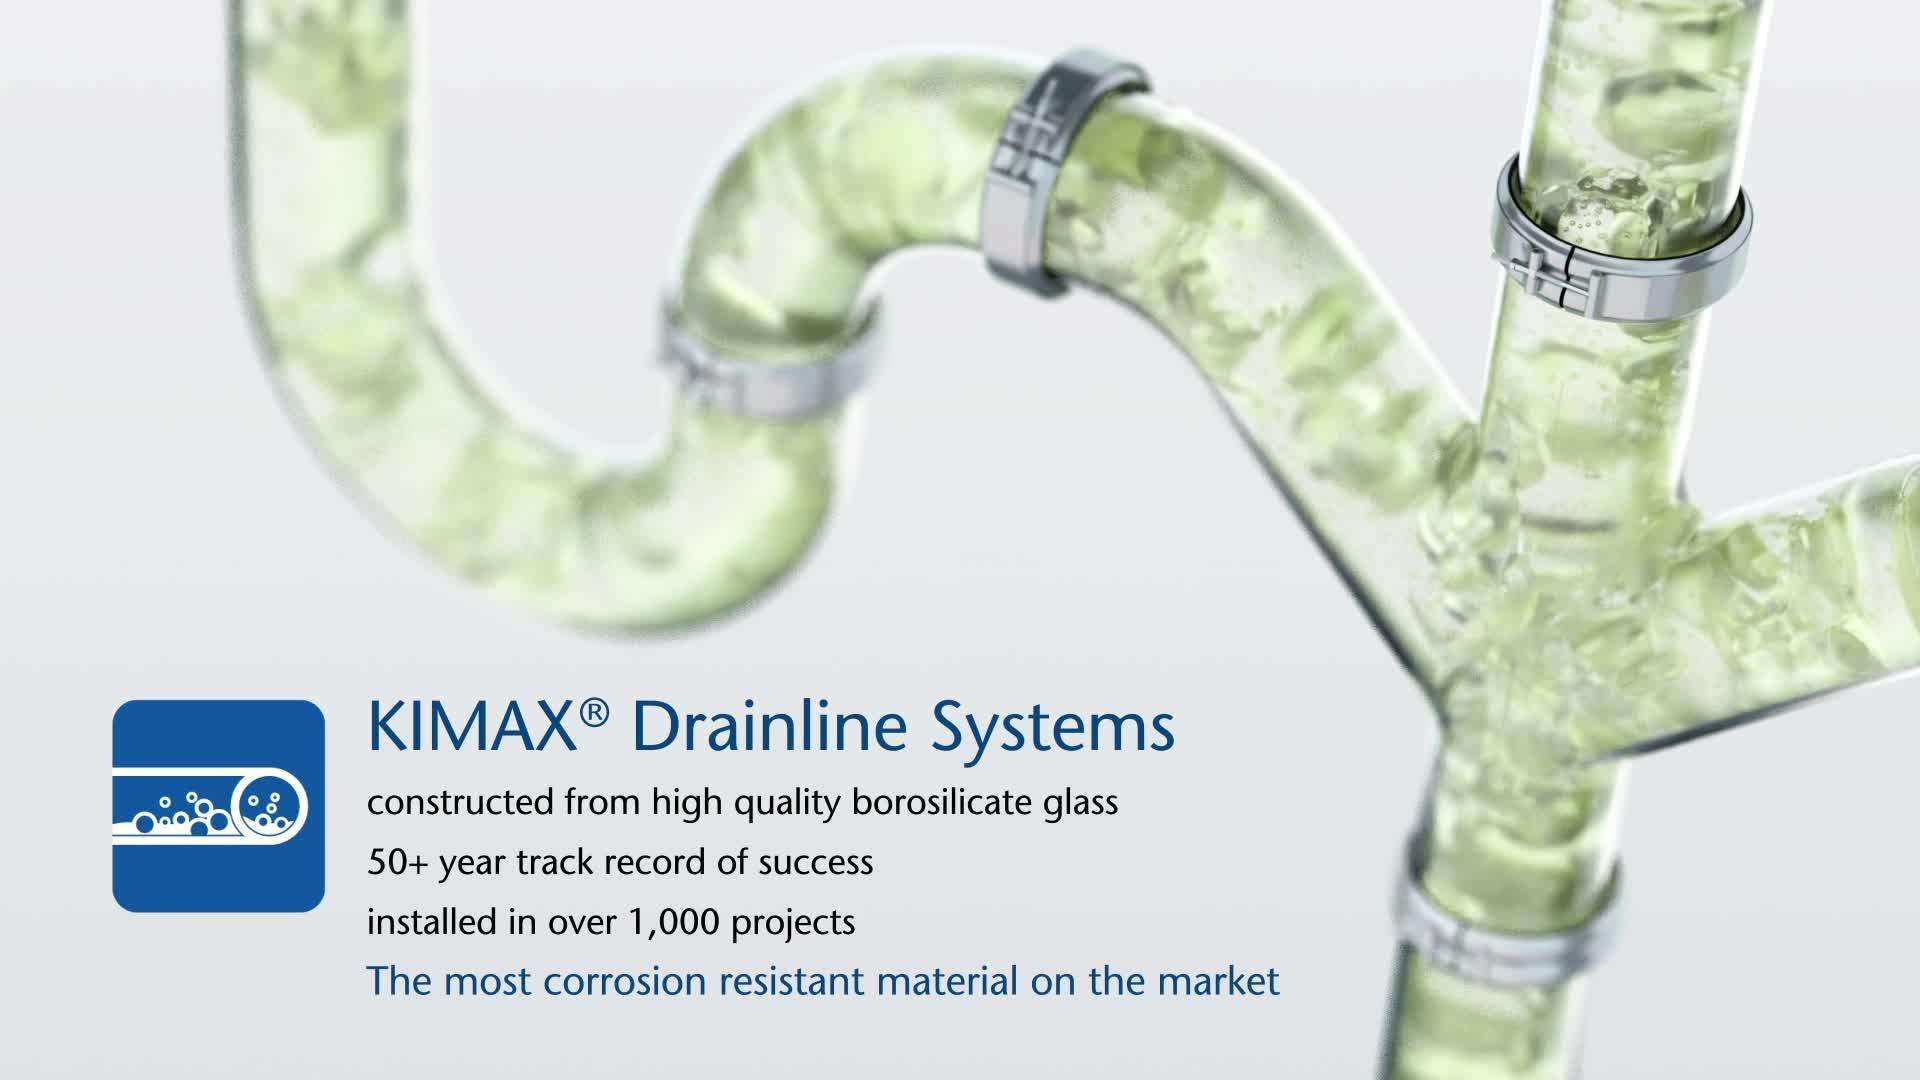 Animation shows corrosion resistance KIMAX® glass drainline versus polymer